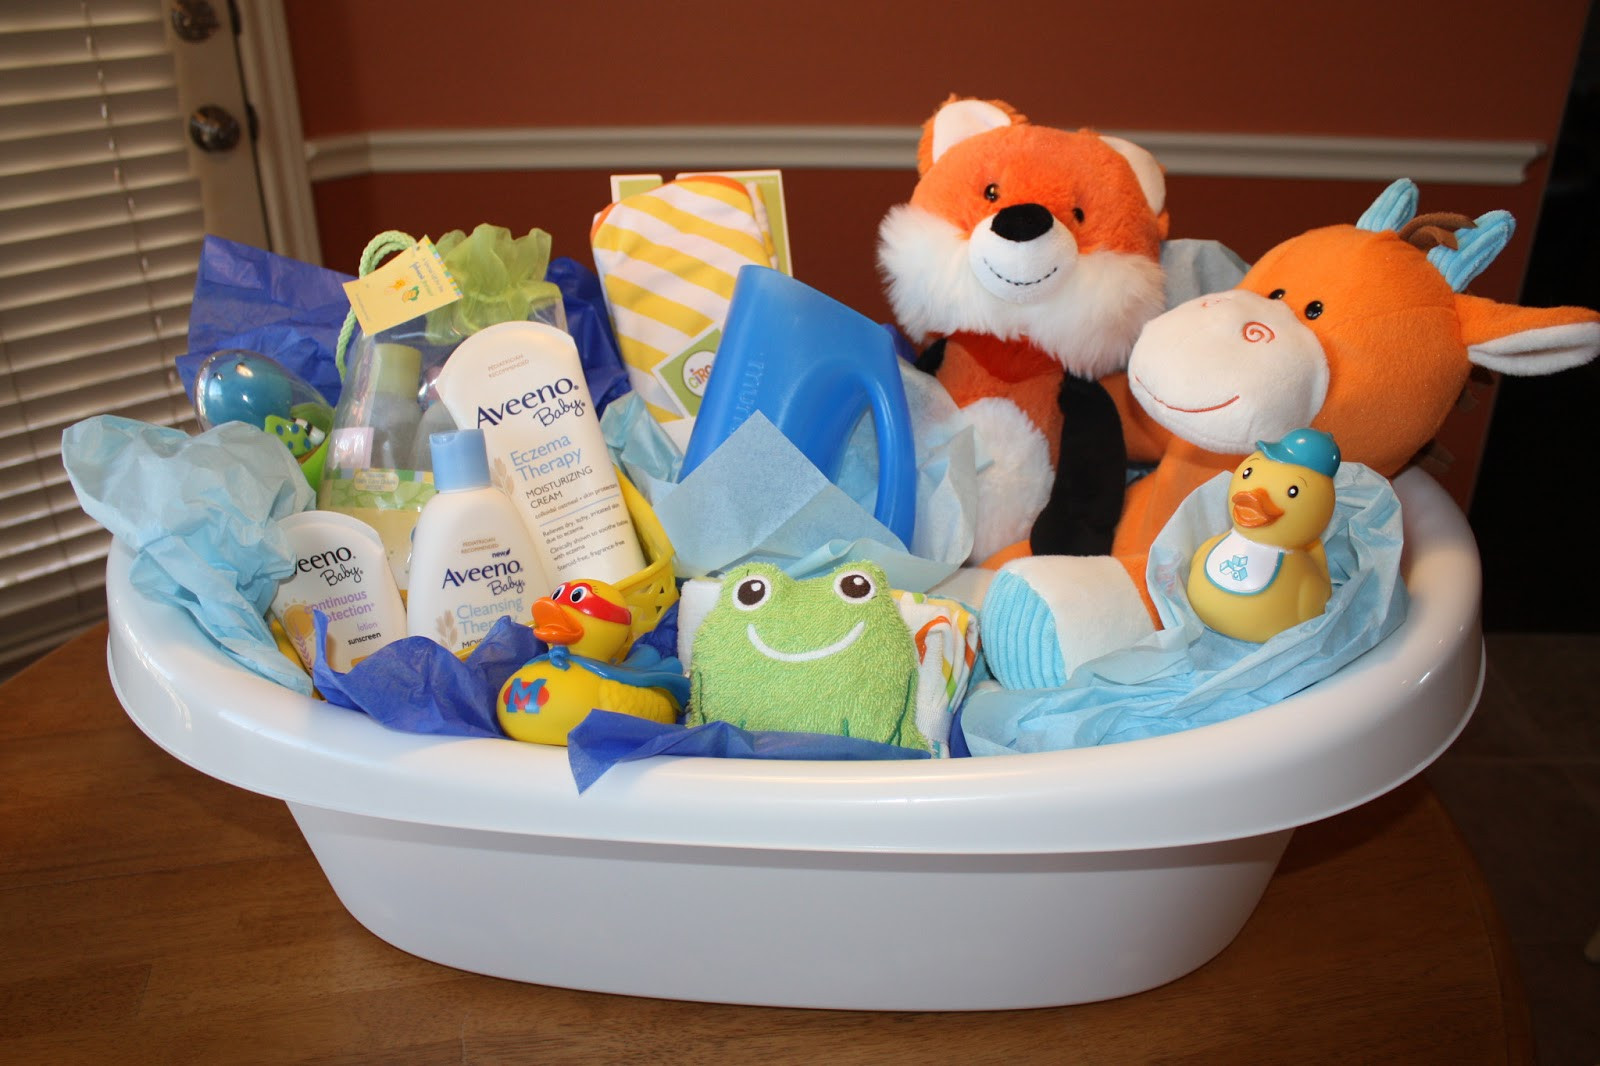 Baby Shower Bathtub Gift Ideas
 The Ultimate $5 99 Baby Shower Gift